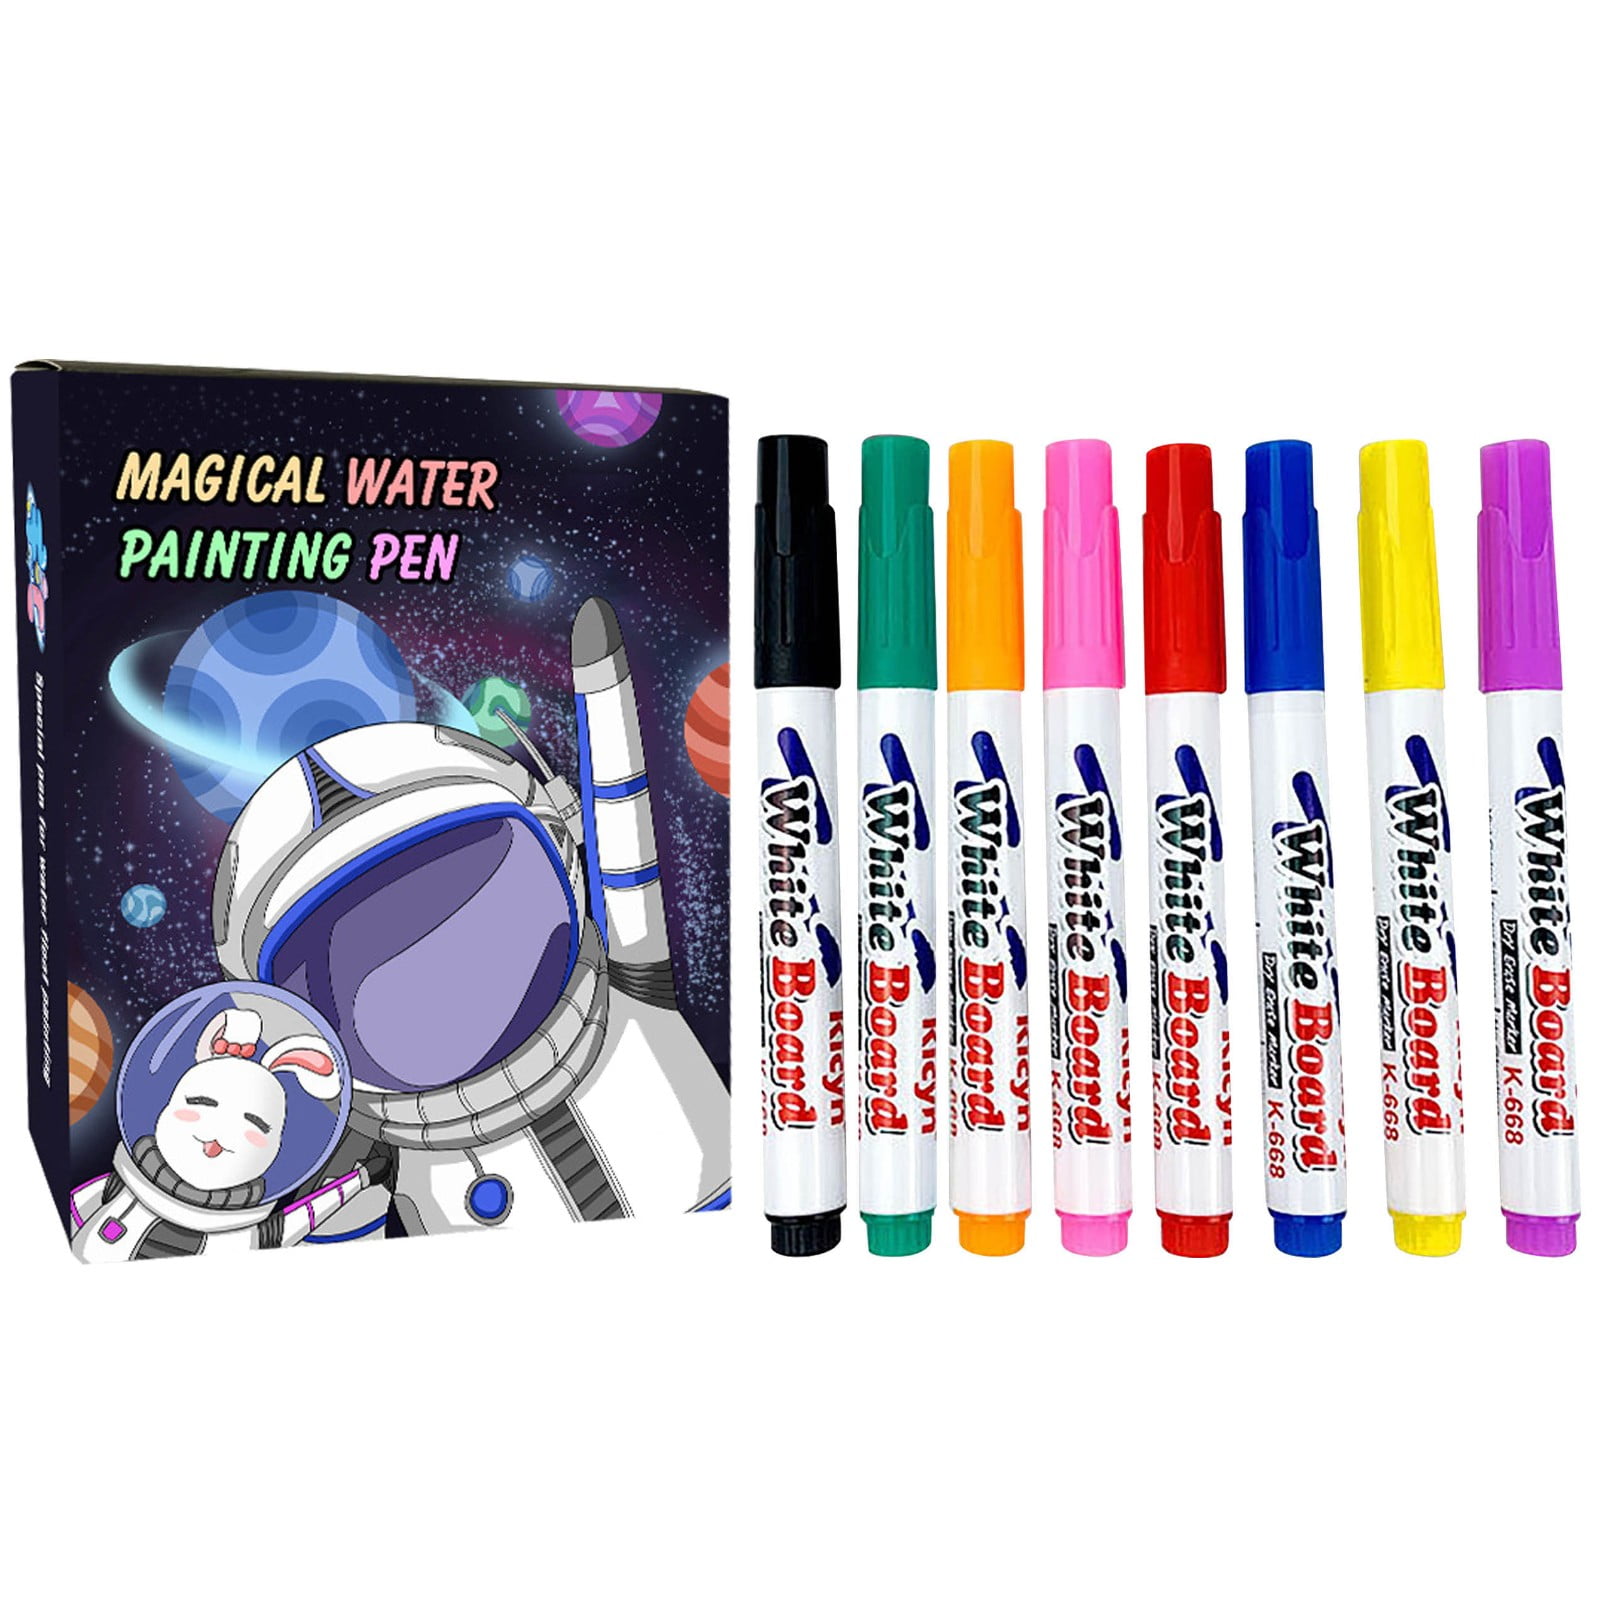 Tattoo Pens - Aka Magical Water Painting Pen - HubPages